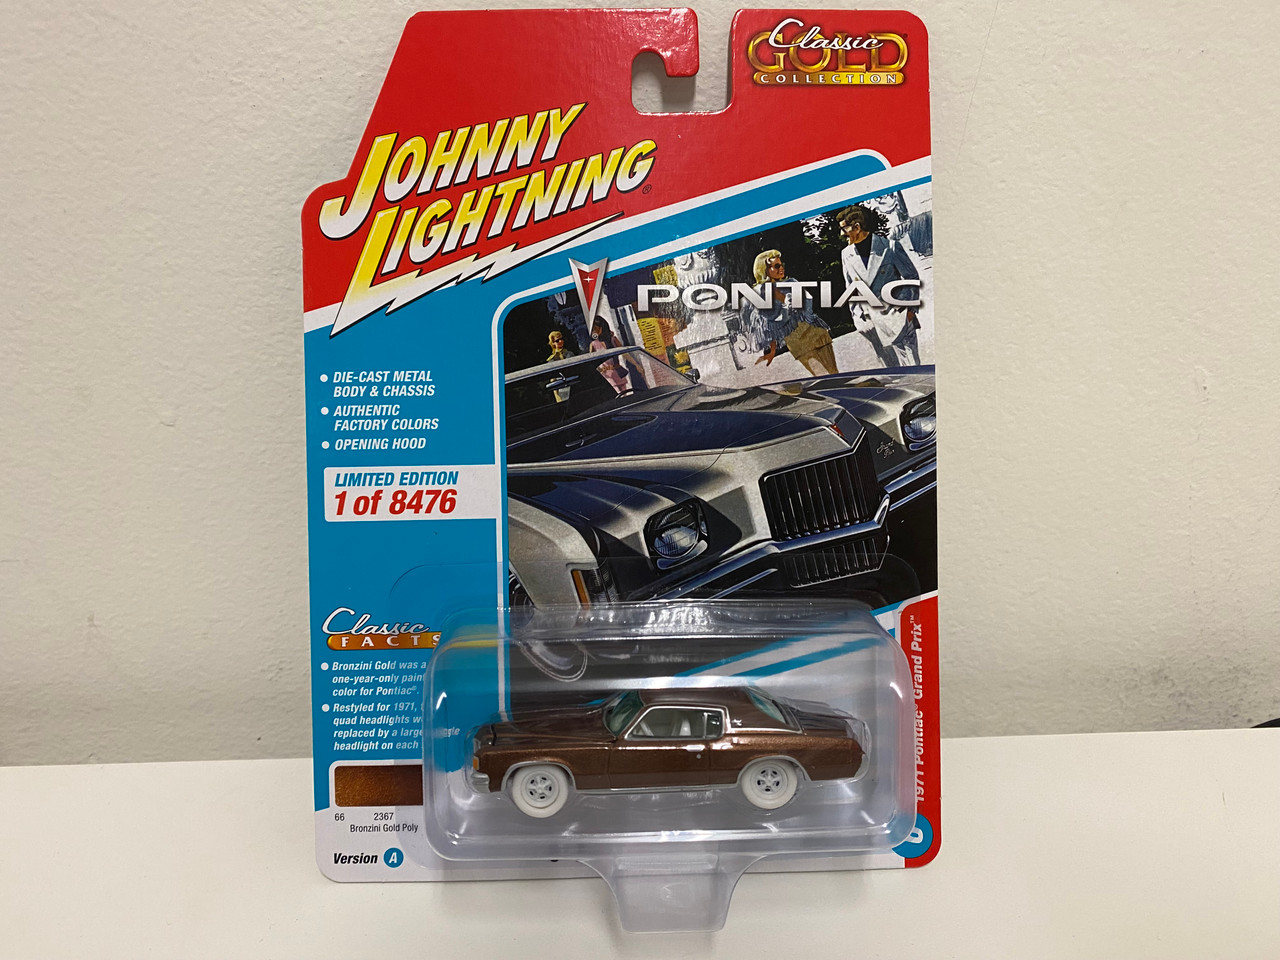 CHASE CAR 1971 Pontiac Grand Prix Bronzini Gold Metallic "Classic Gold Collection" Series Limited Edition to 8476 pieces Worldwide 1/64 Diecast Model Car by Johnny Lightning